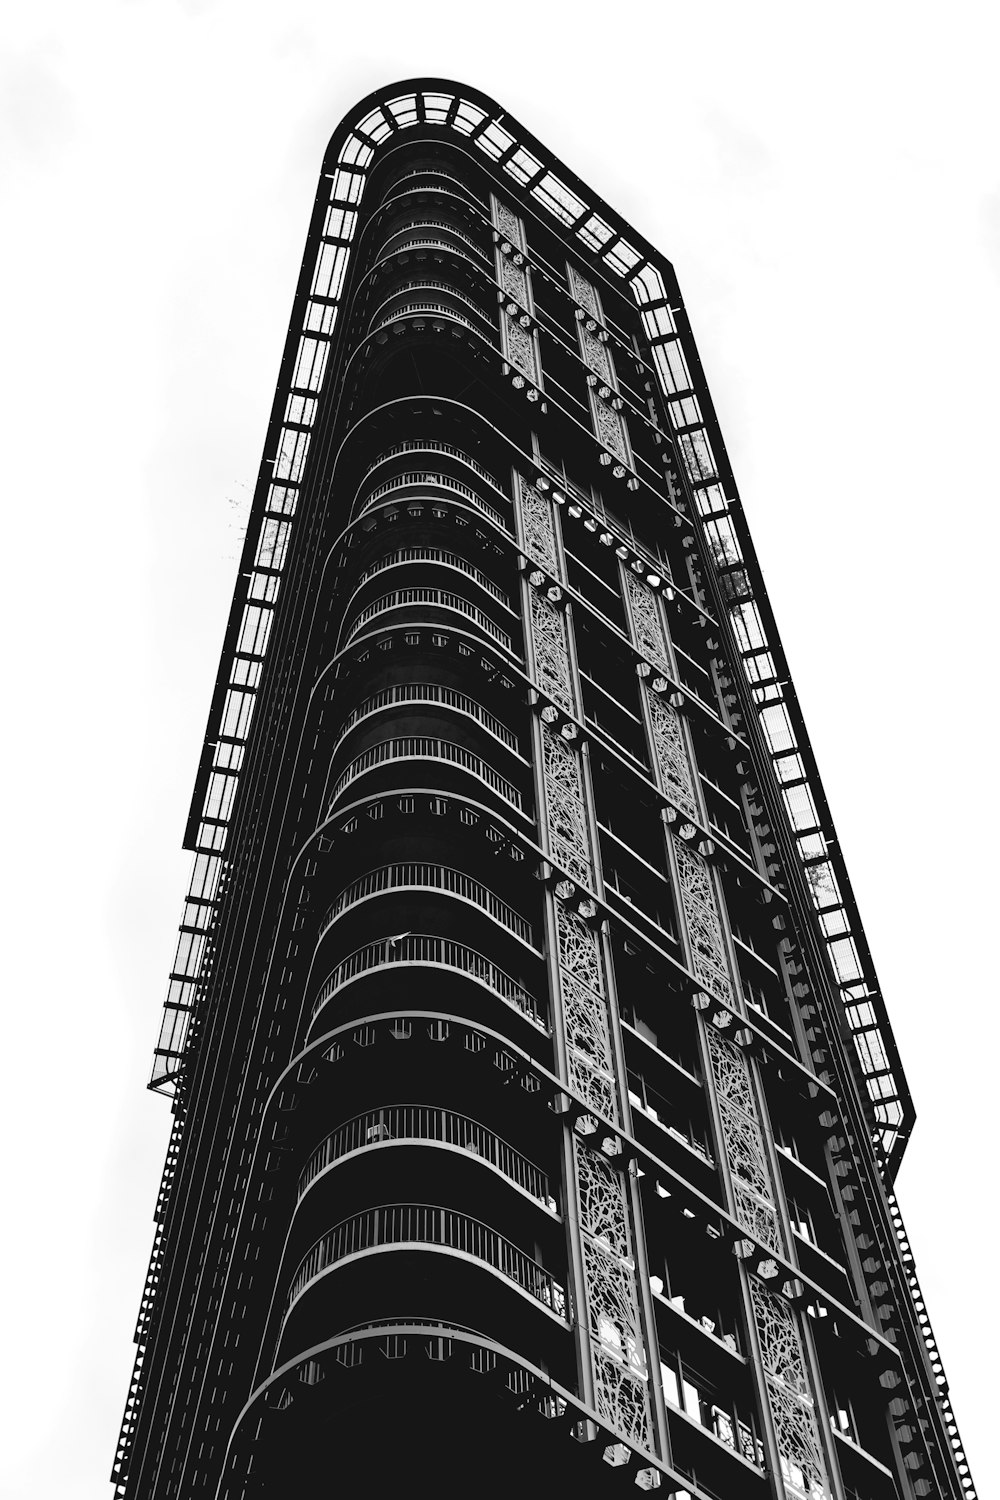 grayscale photography of high-rise building during daytime